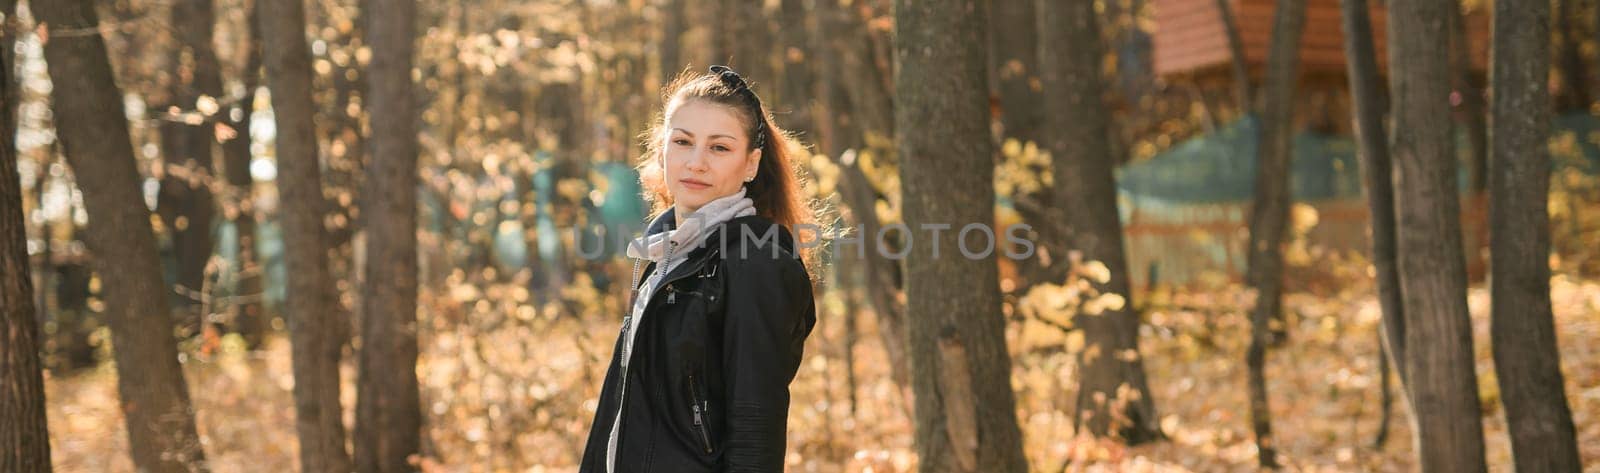 Banner Outdoor atmospheric lifestyle portrait of young beautiful young woman copy space. Warm autumn fall season. Millennial generation and youth by Satura86